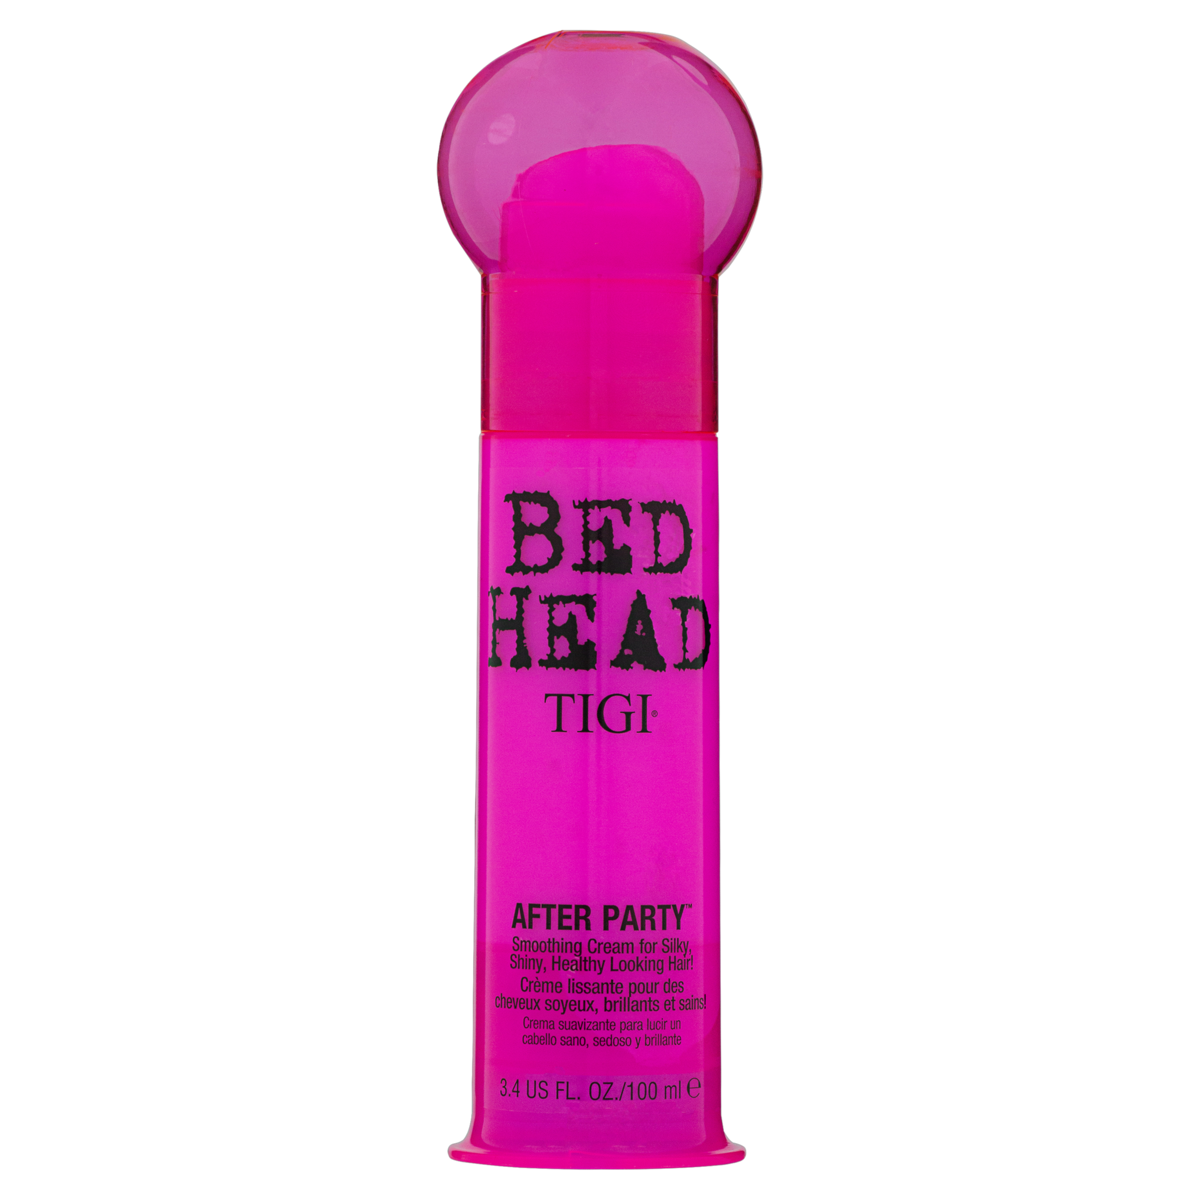 0615908425772 - LEAVE-IN BED HEAD TIGI AFTER PARTY FRASCO 100ML